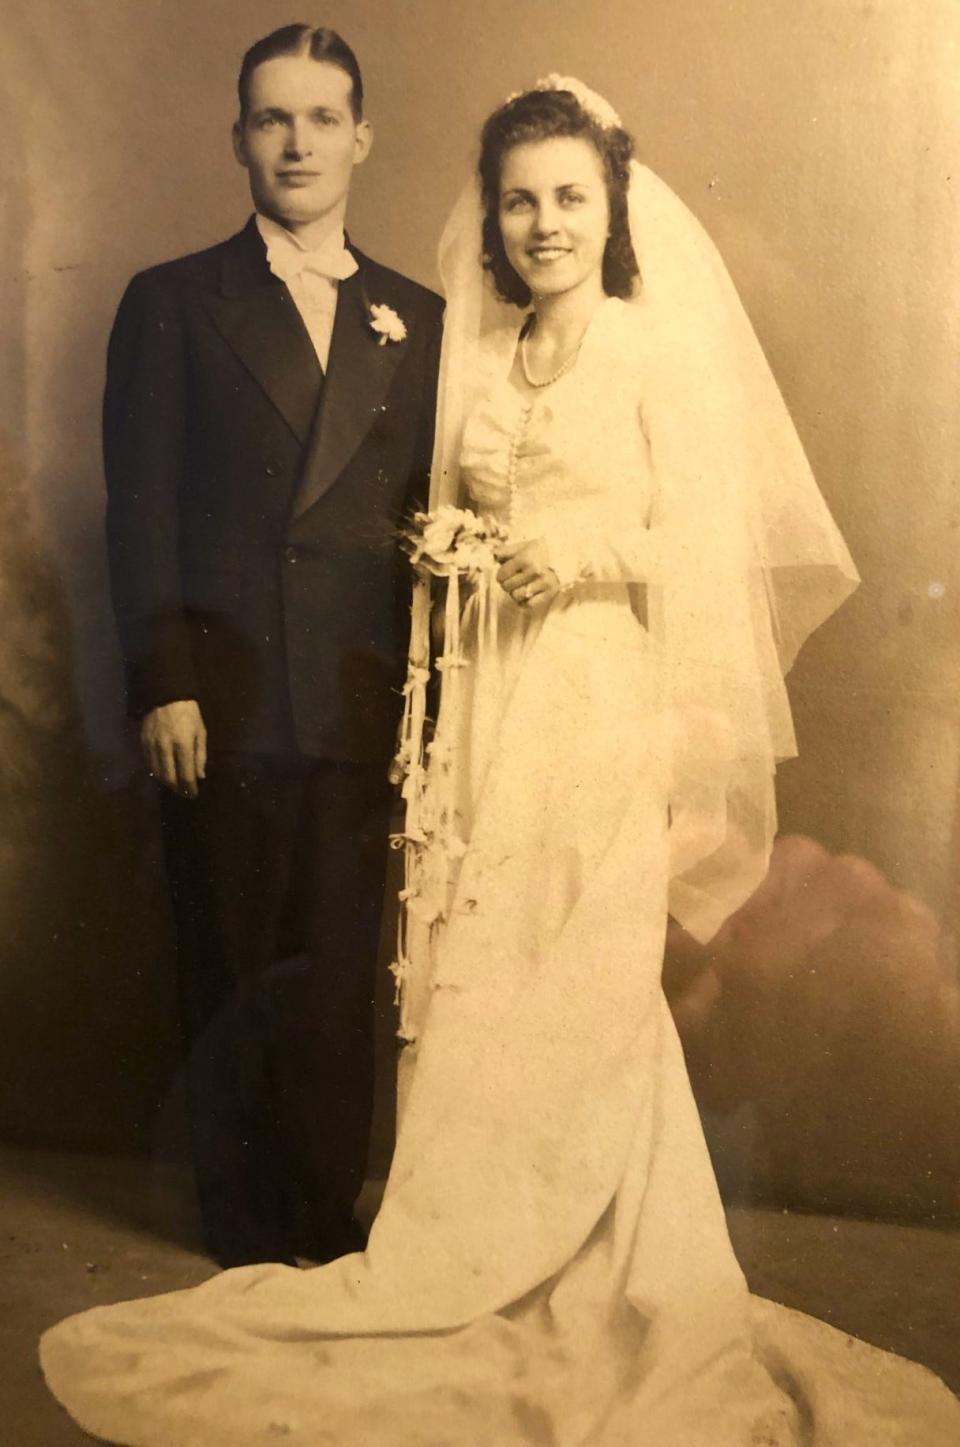 Herbert Sharp, of Milton, and Josephine Coletti, of Quincy, on their wedding day in 1945.